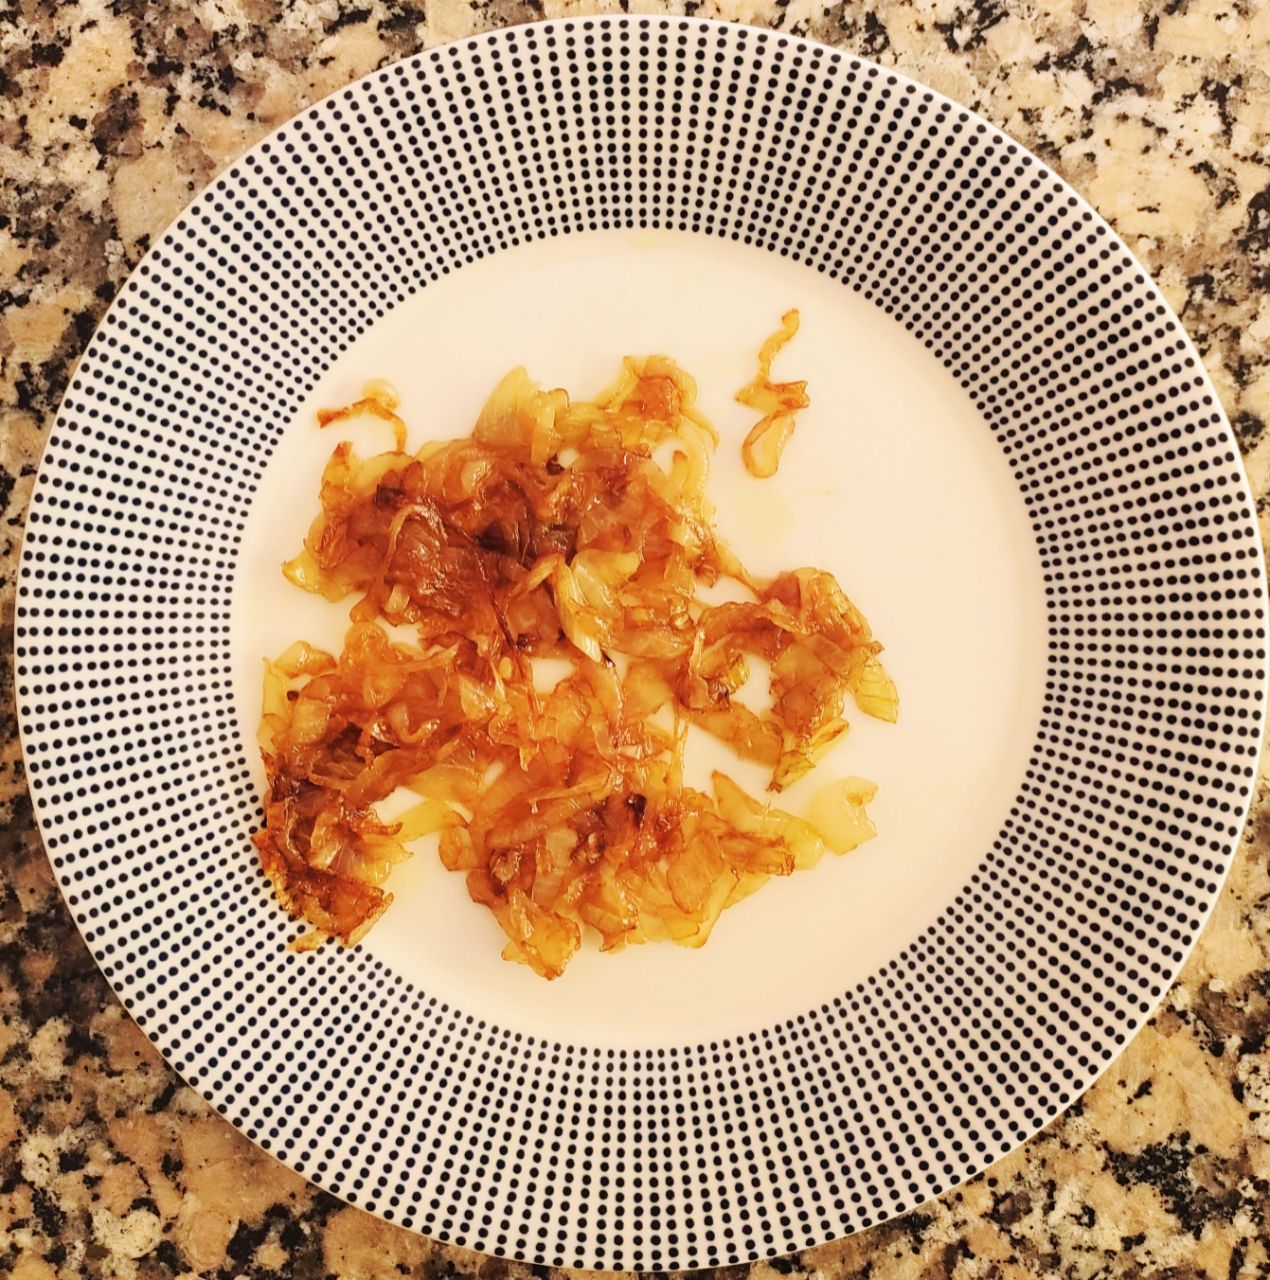 Caramelised onions fried in Serriana Olive Oil